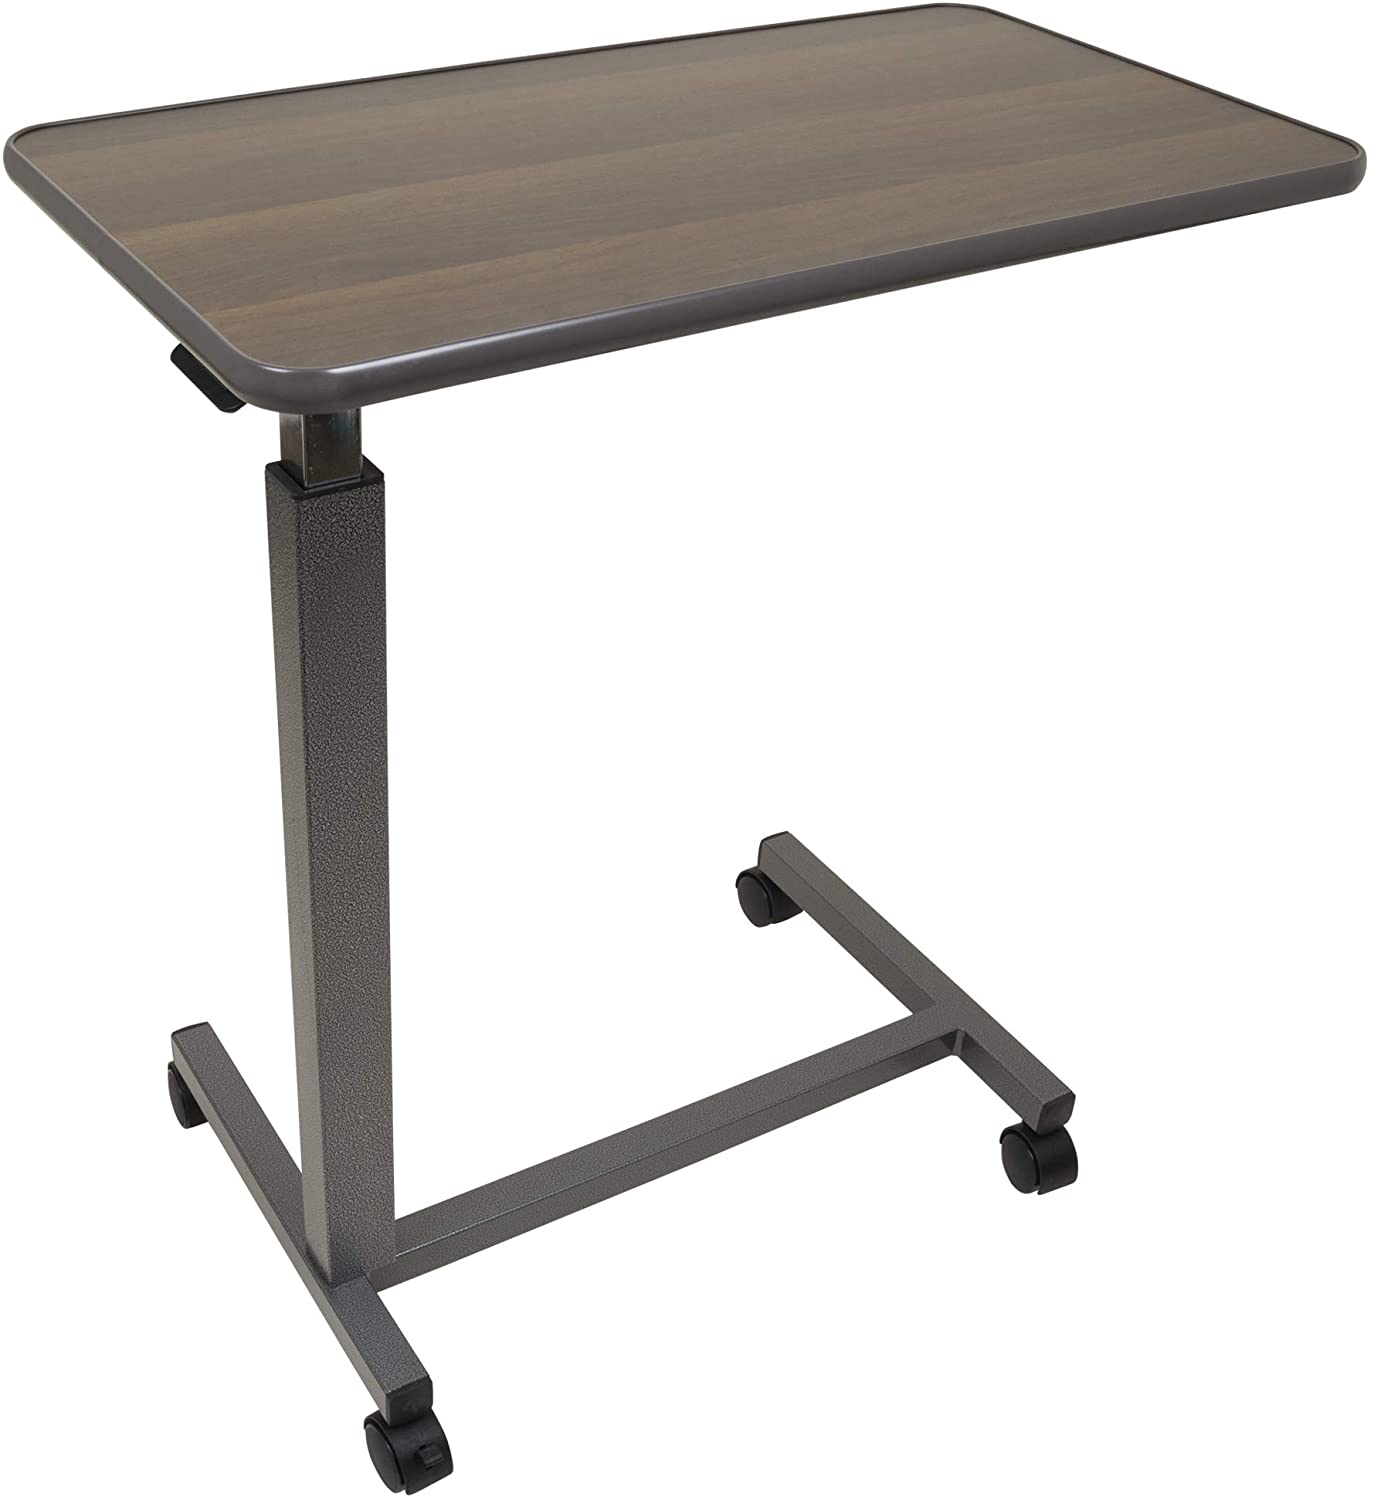 Carex Woodgrain Top Overbed Table - Carex Health Brands